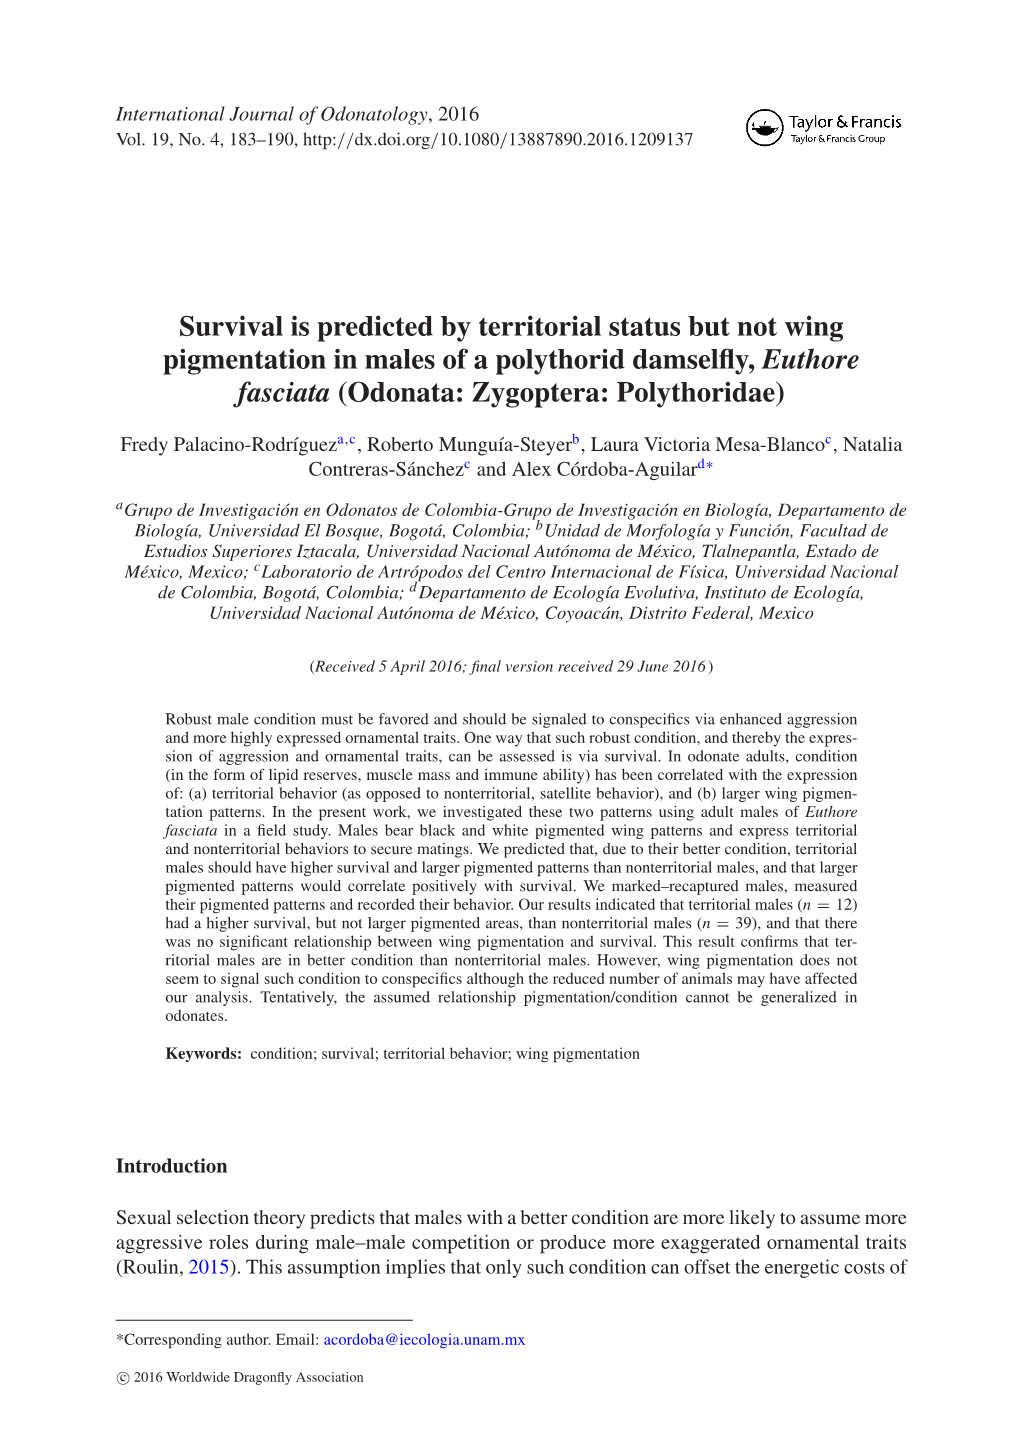 Survival Is Predicted by Territorial Status but Not Wing Pigmentation in Males of a Polythorid Damselfly, Euthore Fasciata